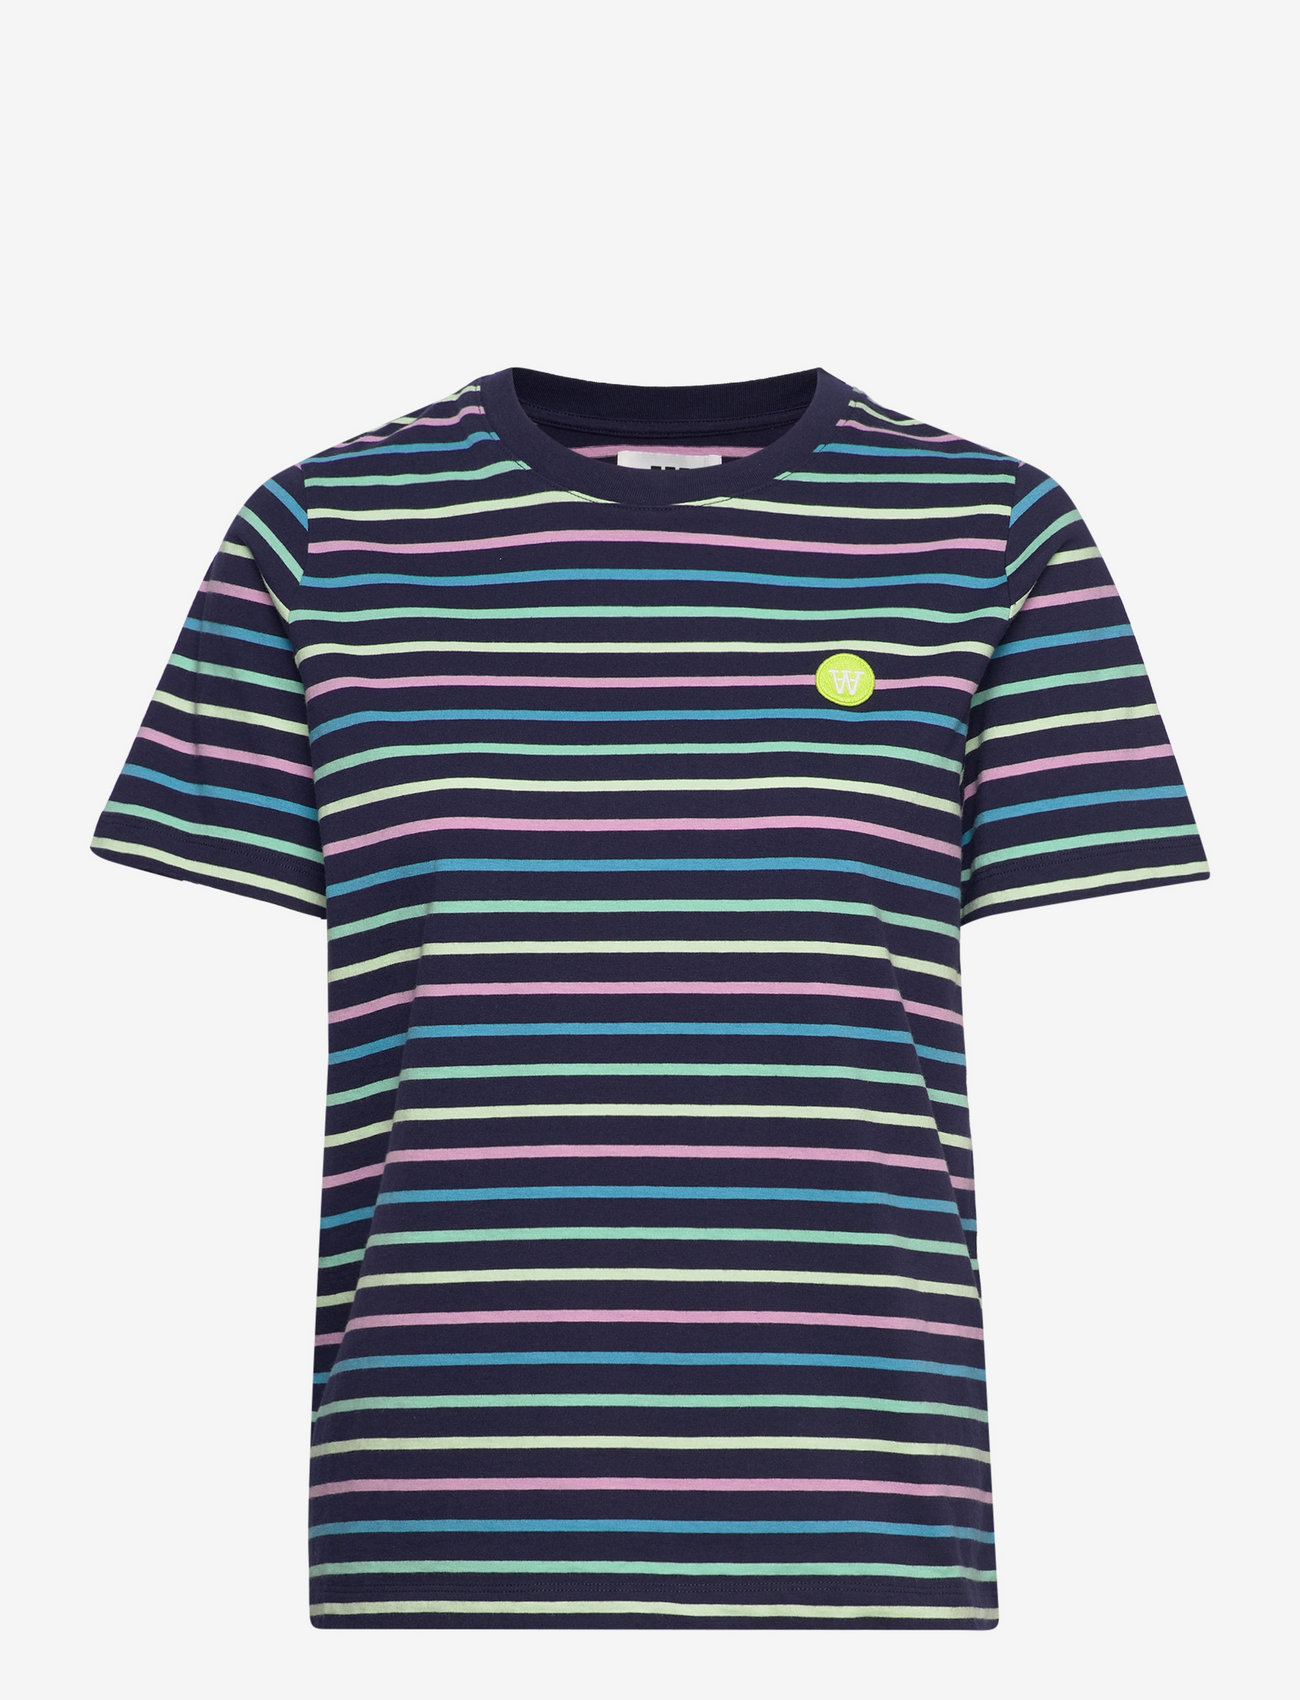 Double A by Wood Wood - Mia stripe T-shirt - t-shirt & tops - navy stripes - 0